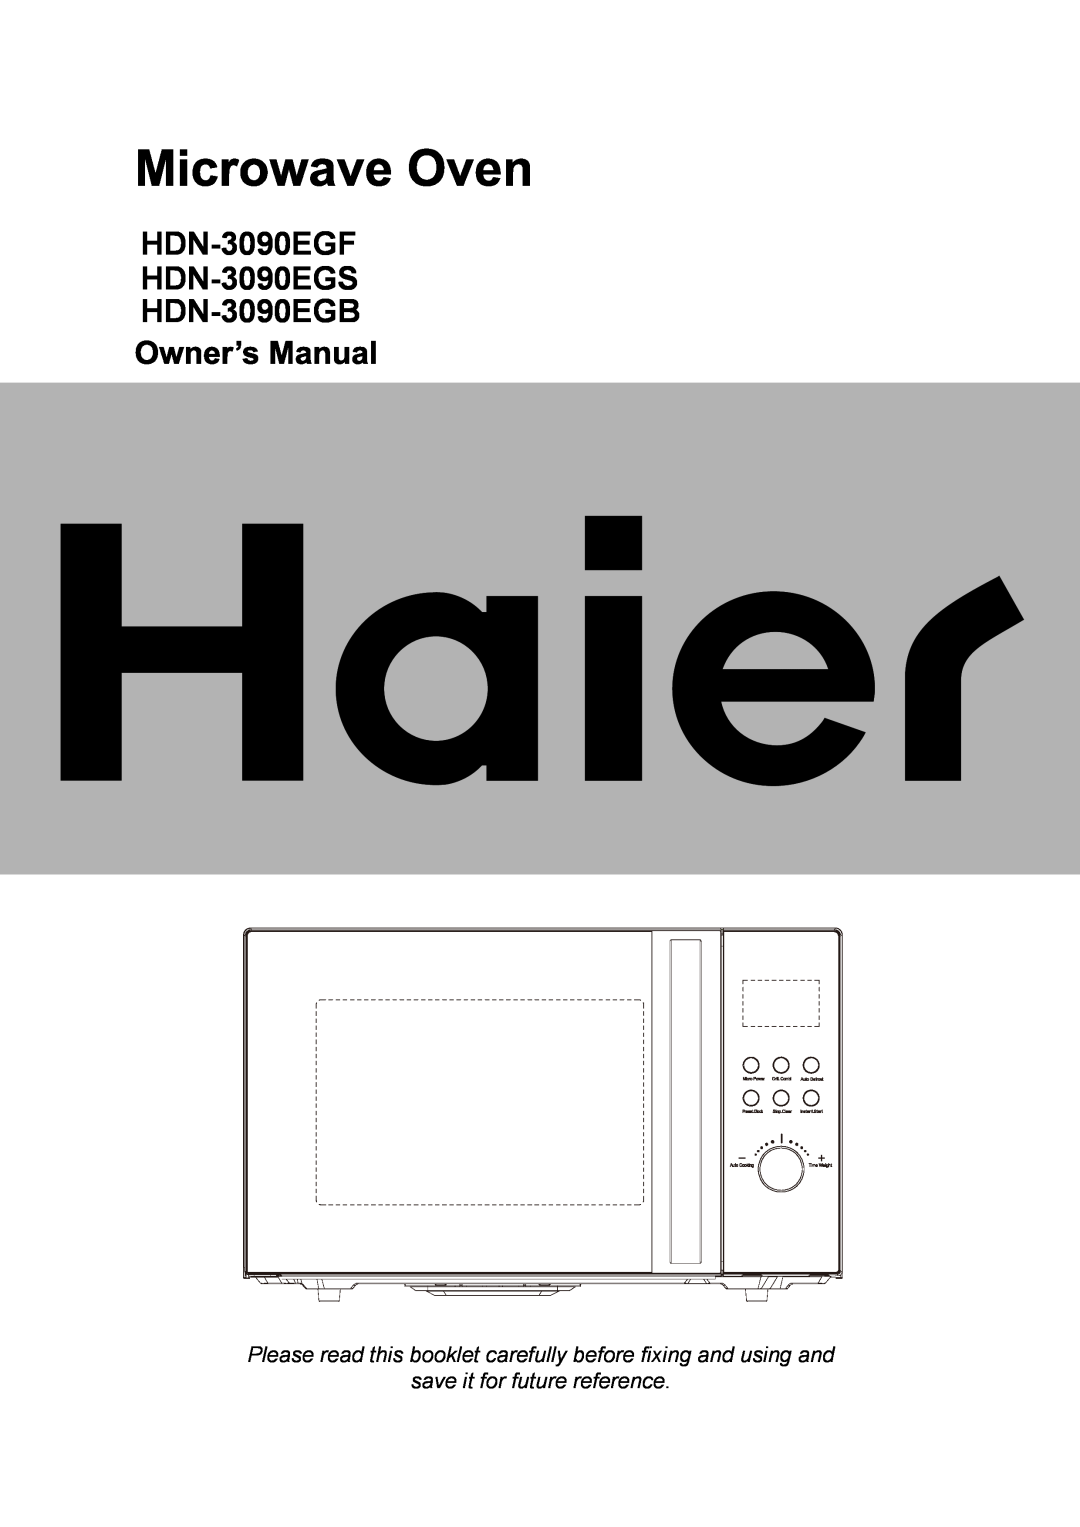 Haier manual HDN-3090EGF HDN-3090EGS HDN-3090EGB, save it for future reference 